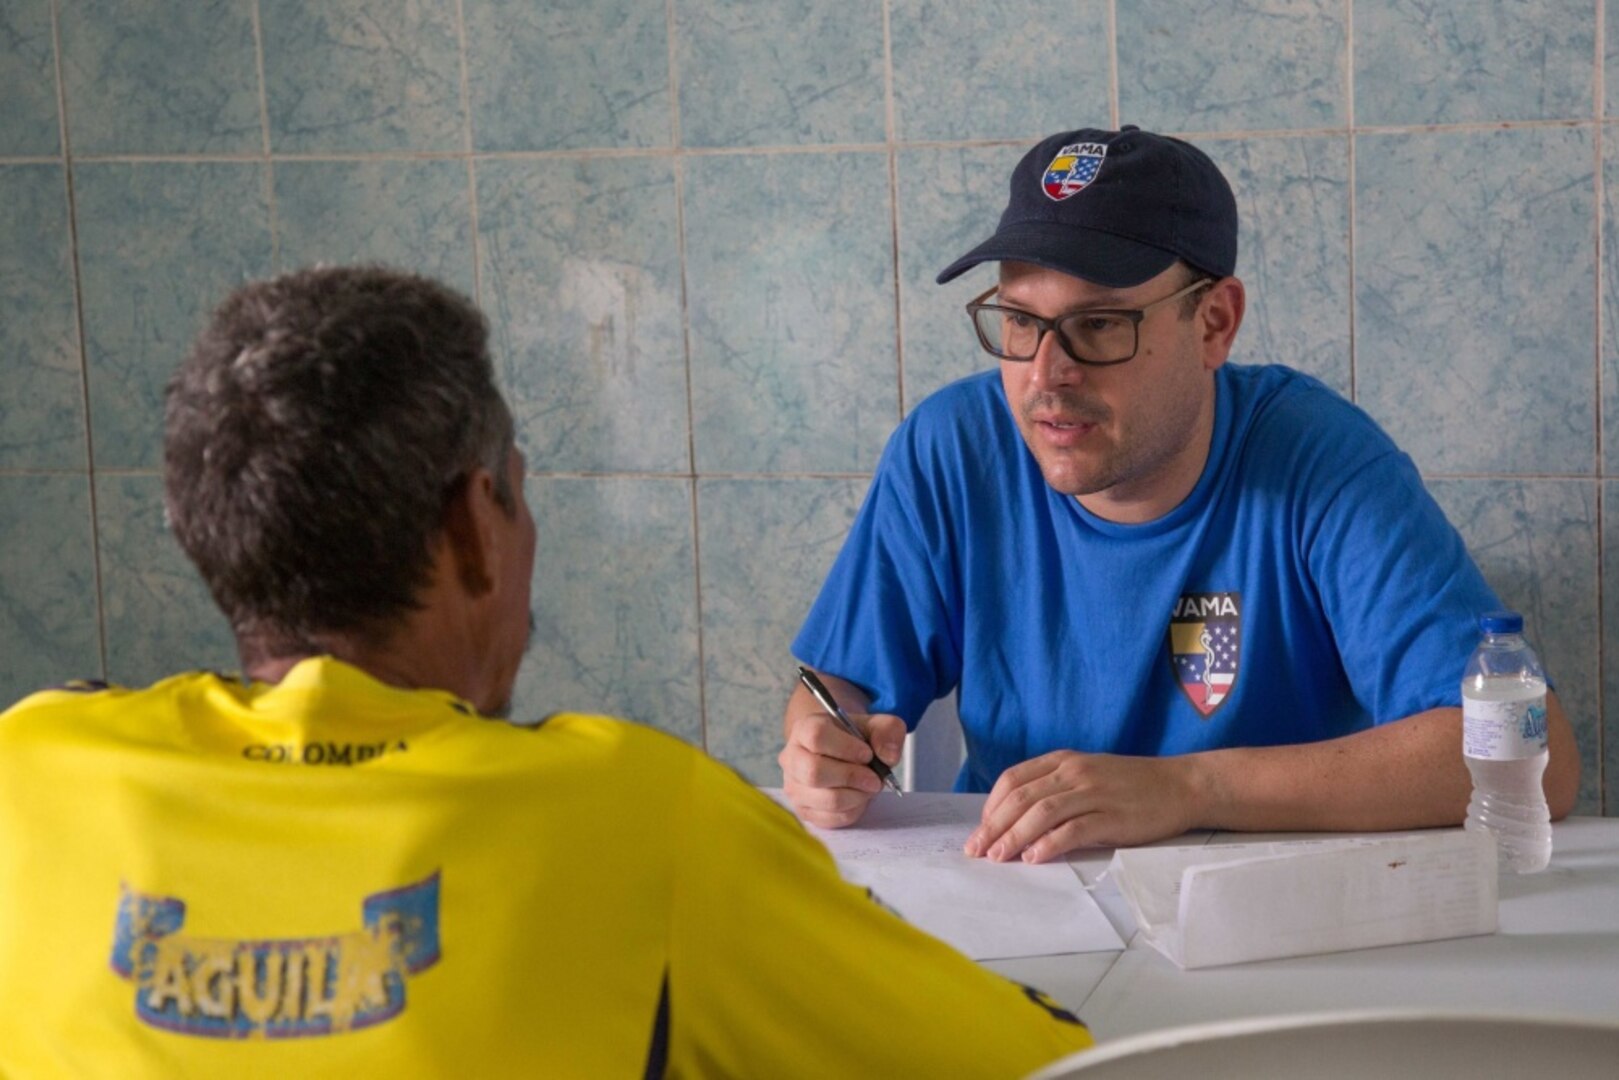 Jauier Andrade, a surgeon from New York City and a member of the Venezuelan American Medical Association, talks to a patient at one of two medical sites.